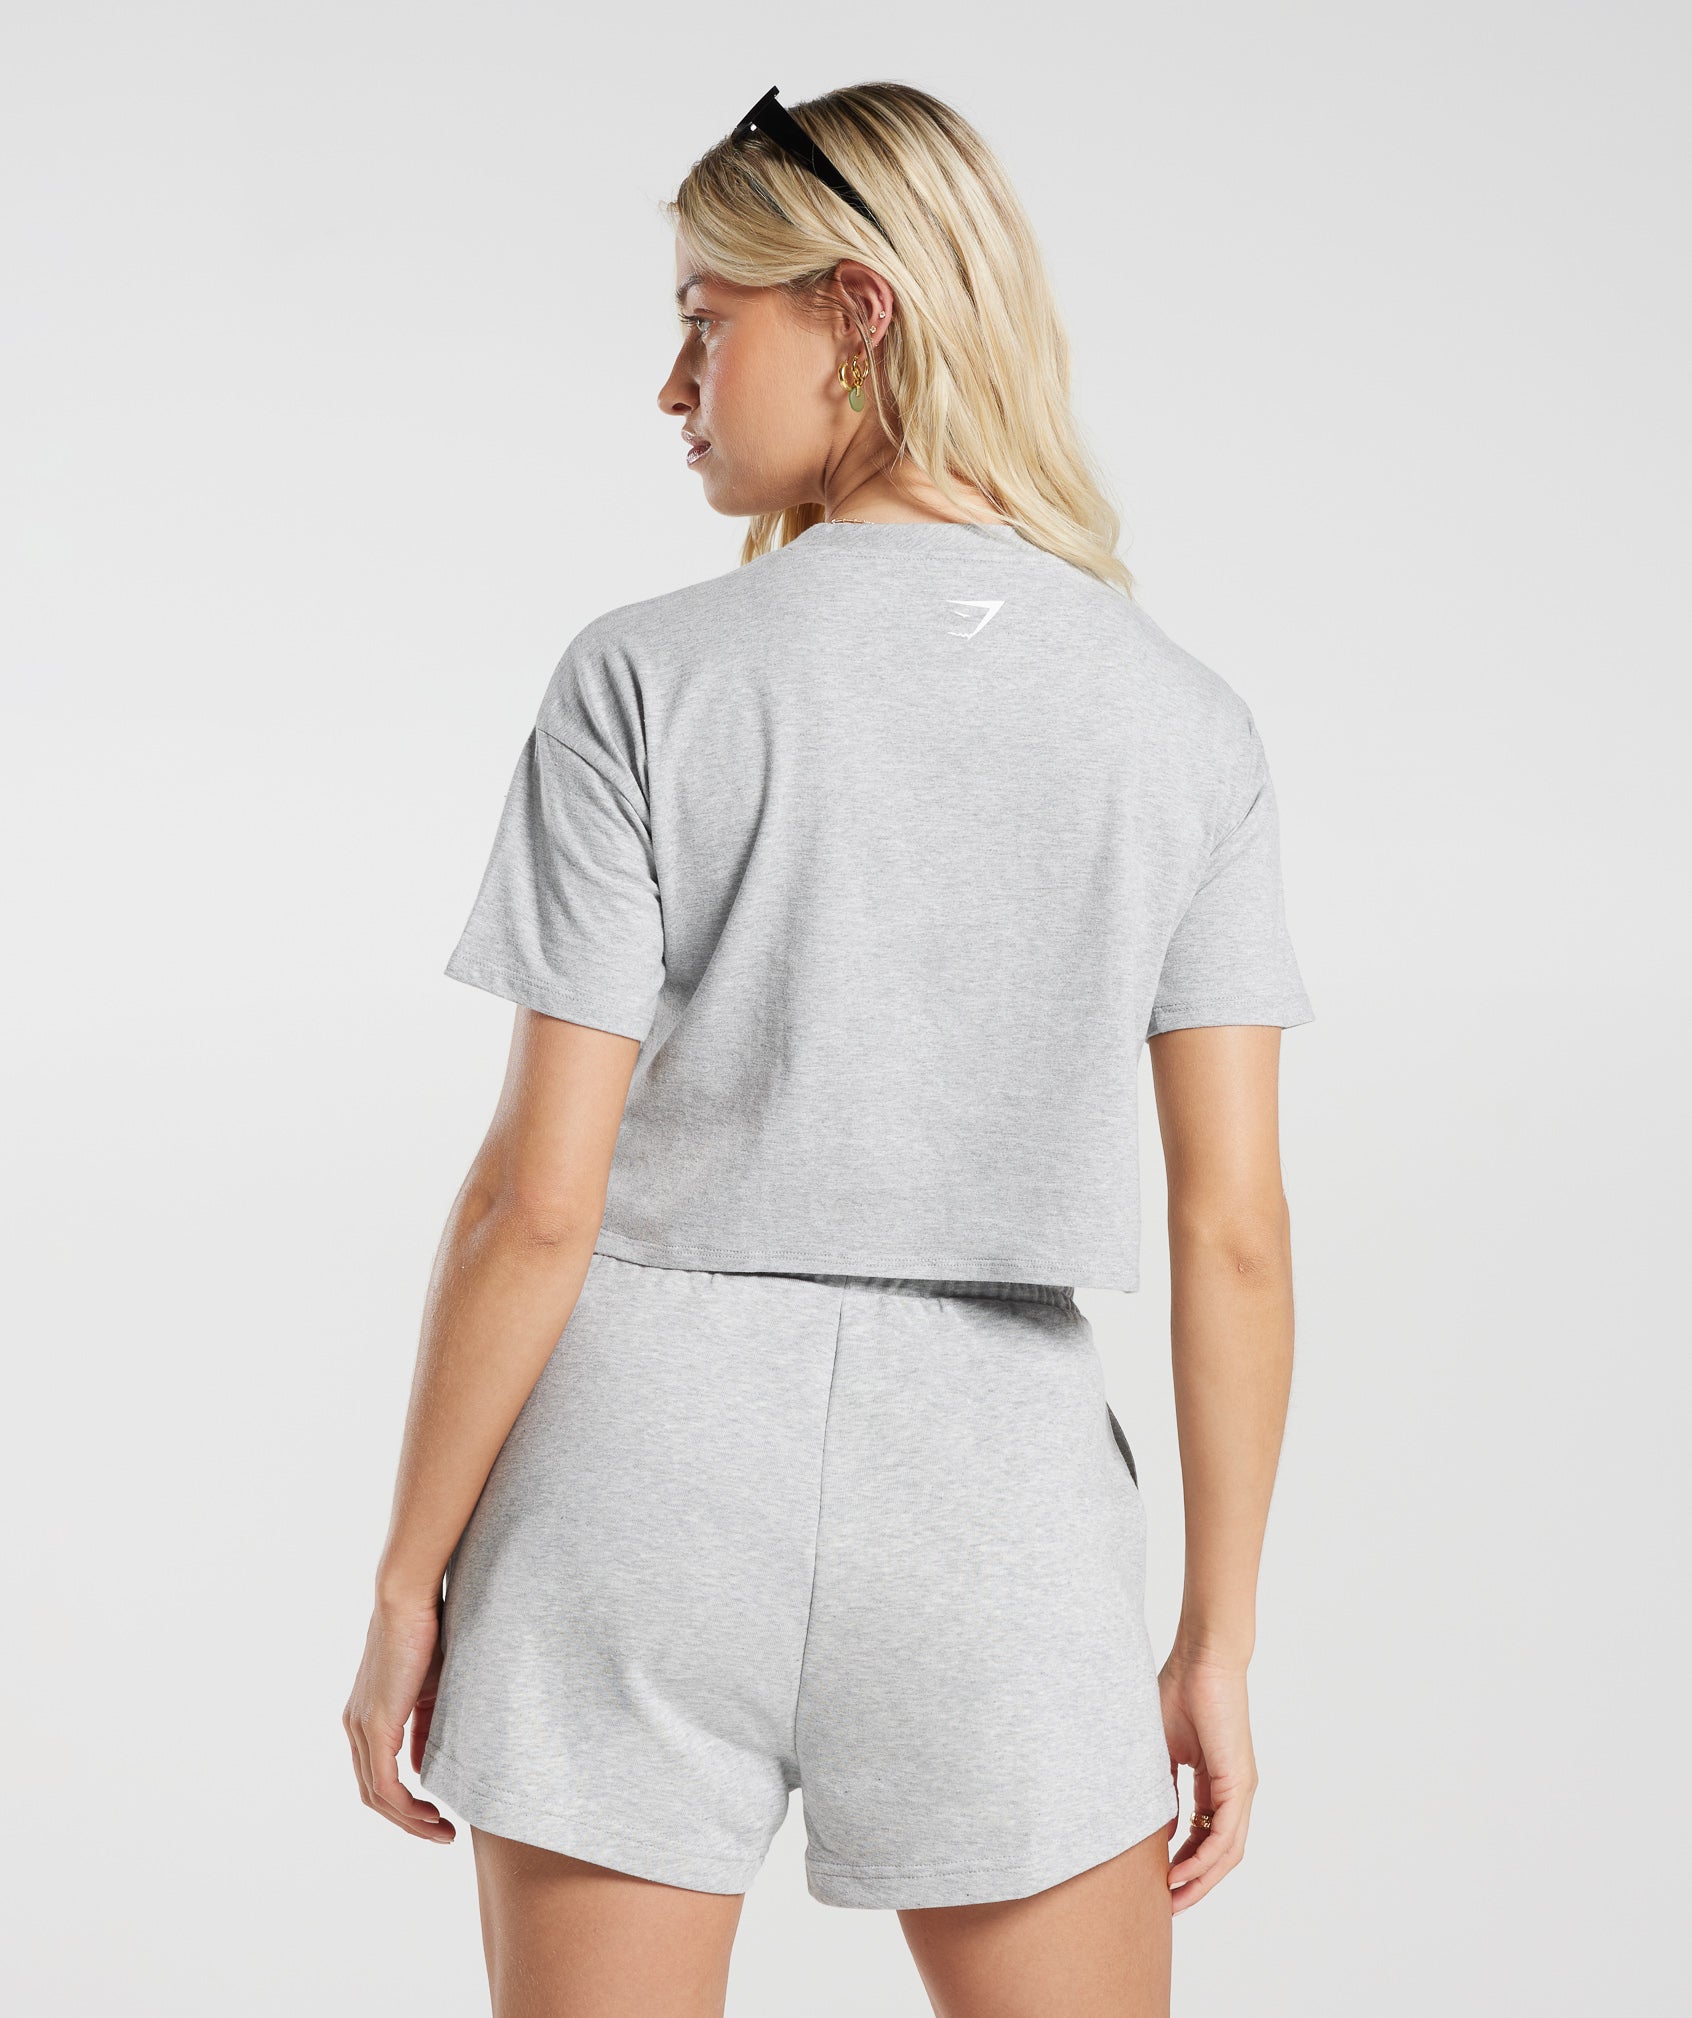 Strong Peach Midi Top in Light Grey Marl - view 2